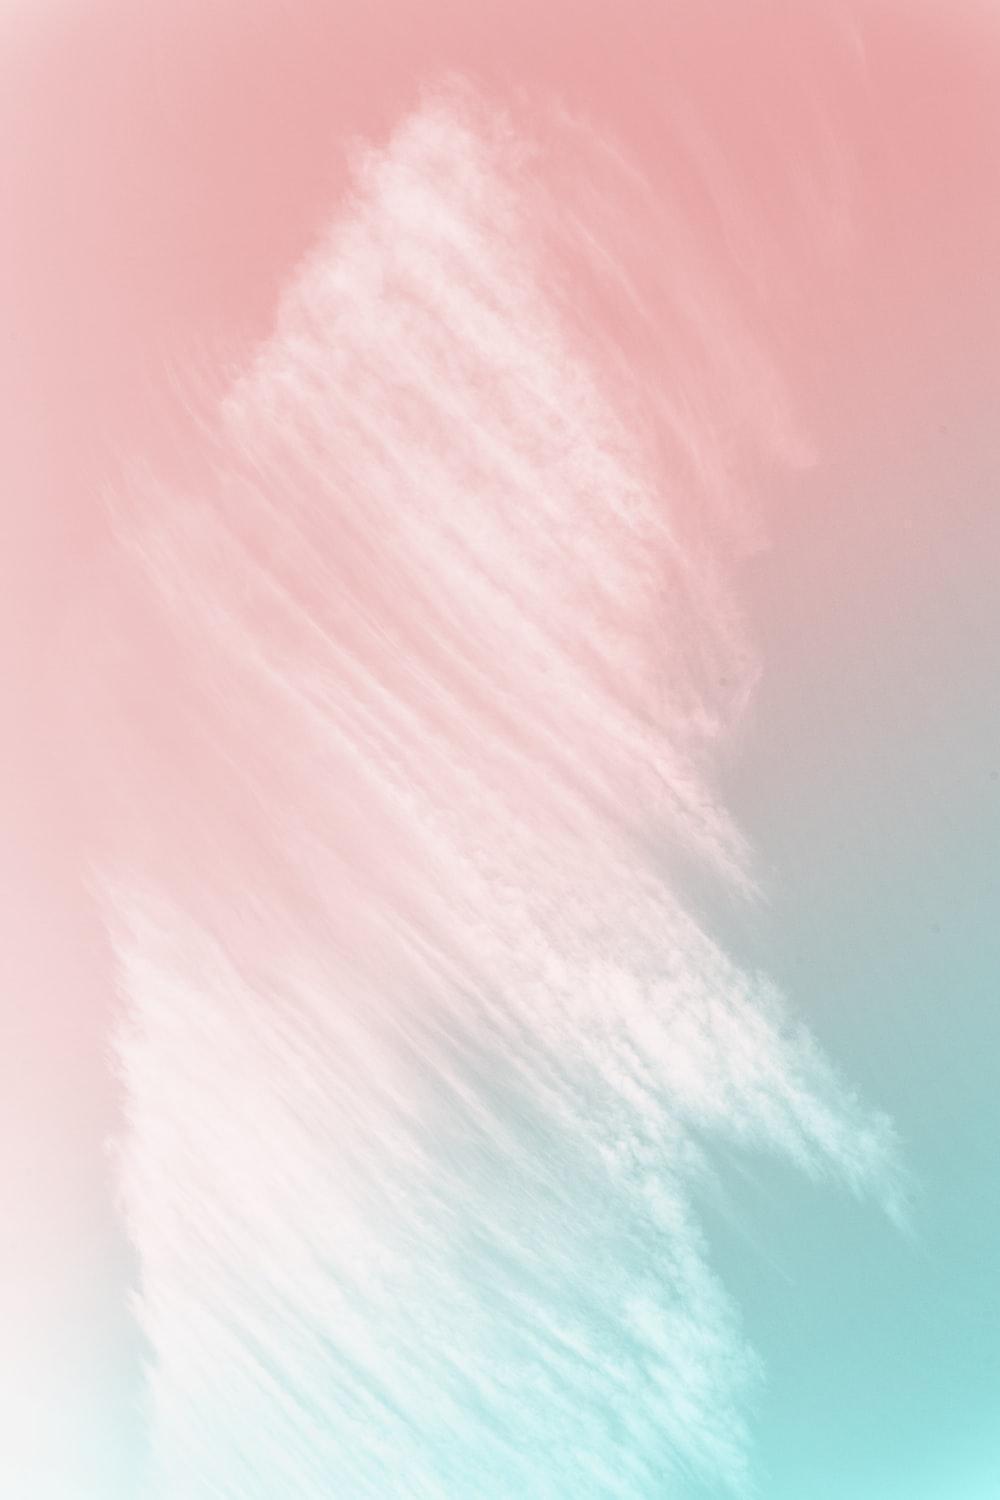 Delicate Pastels Wallpapers - Wallpaper Cave